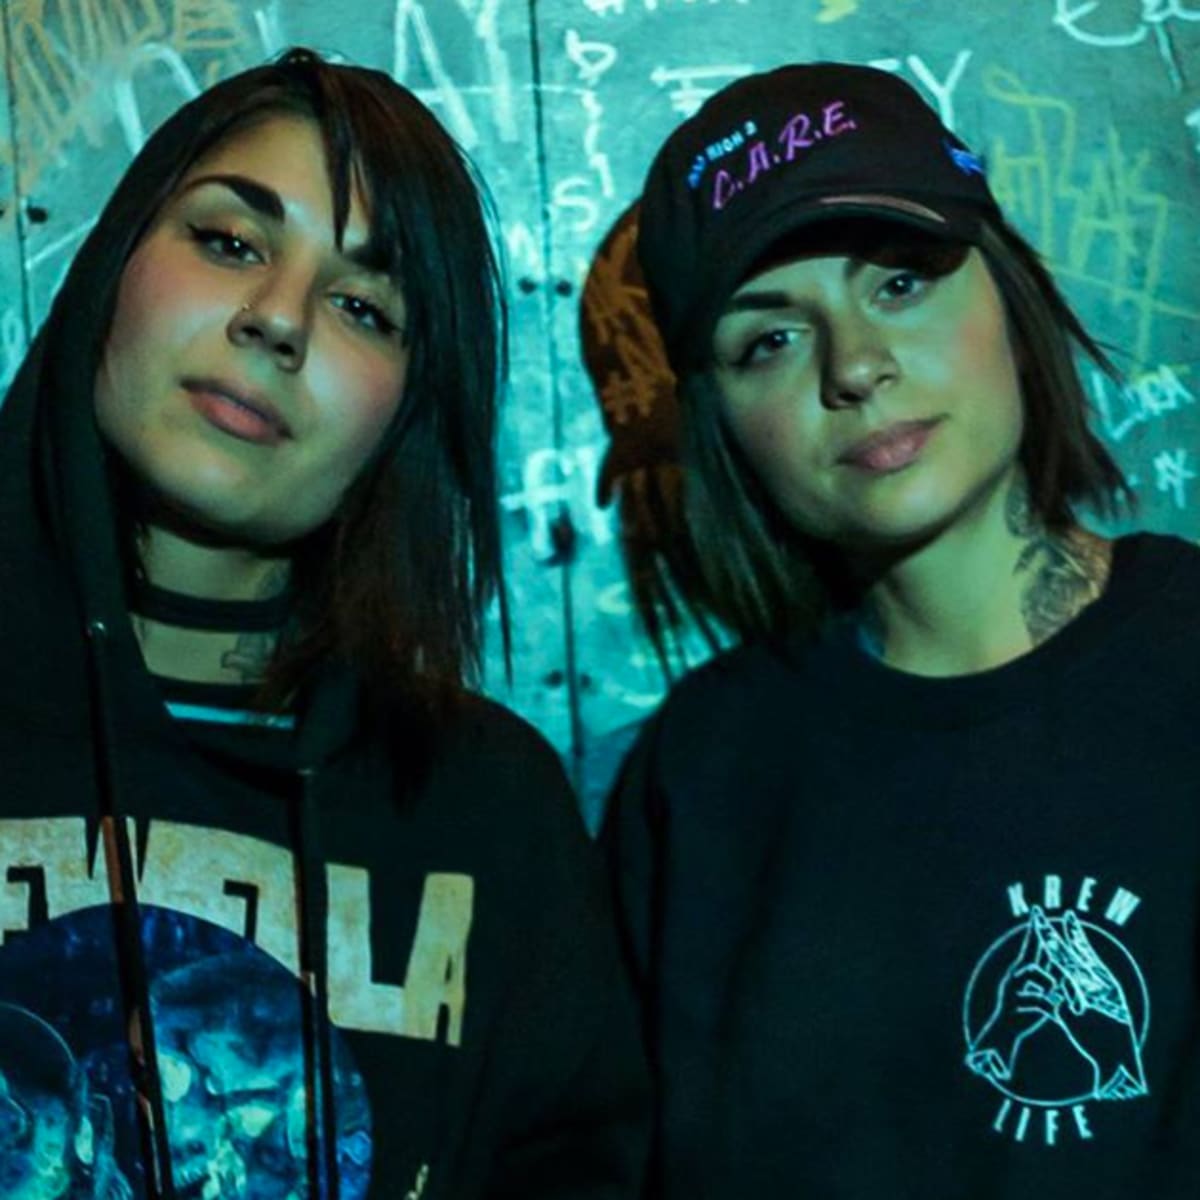 Krewella Explain The Story Behind Their New Track Mana Edm Com The Latest Electronic Dance Music News Reviews Artists